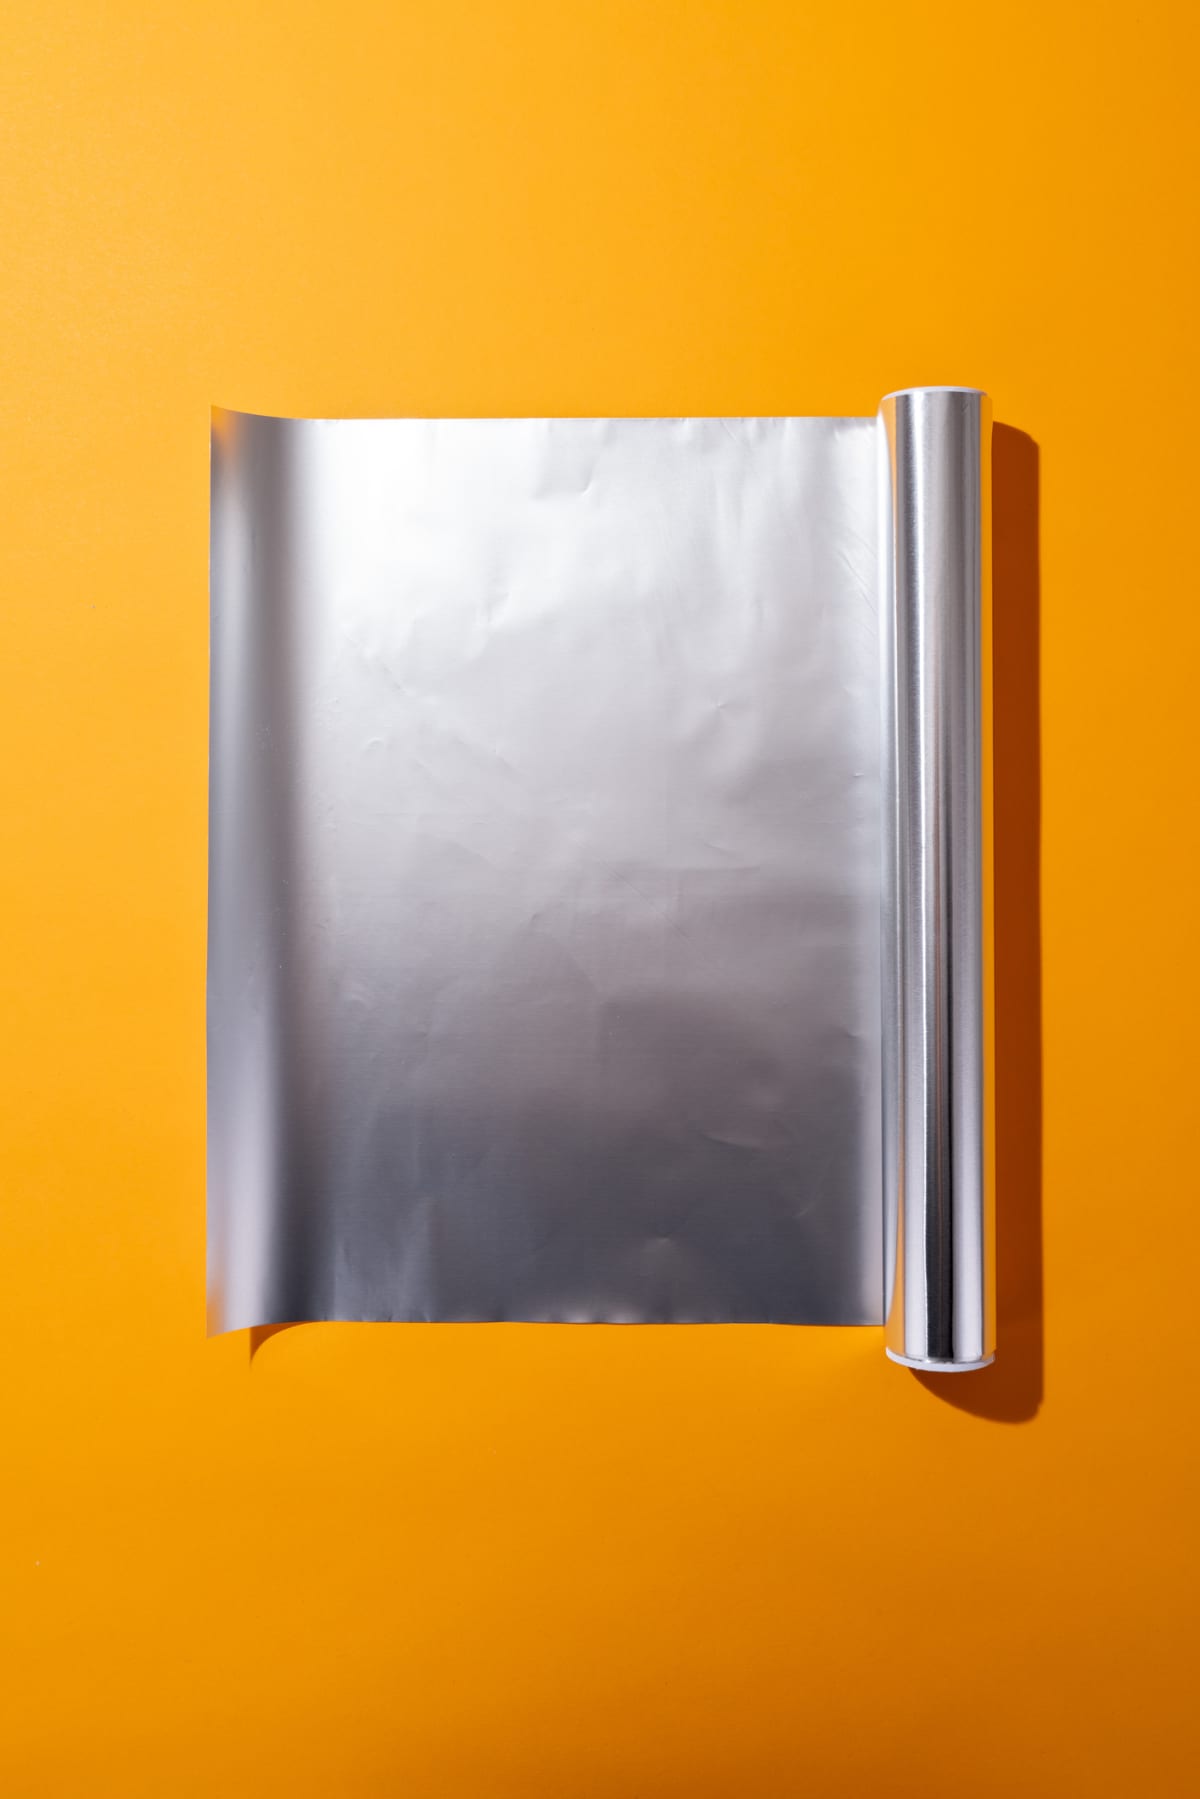 A roll of shiny aluminum foil displayed against a vibrant yellow background